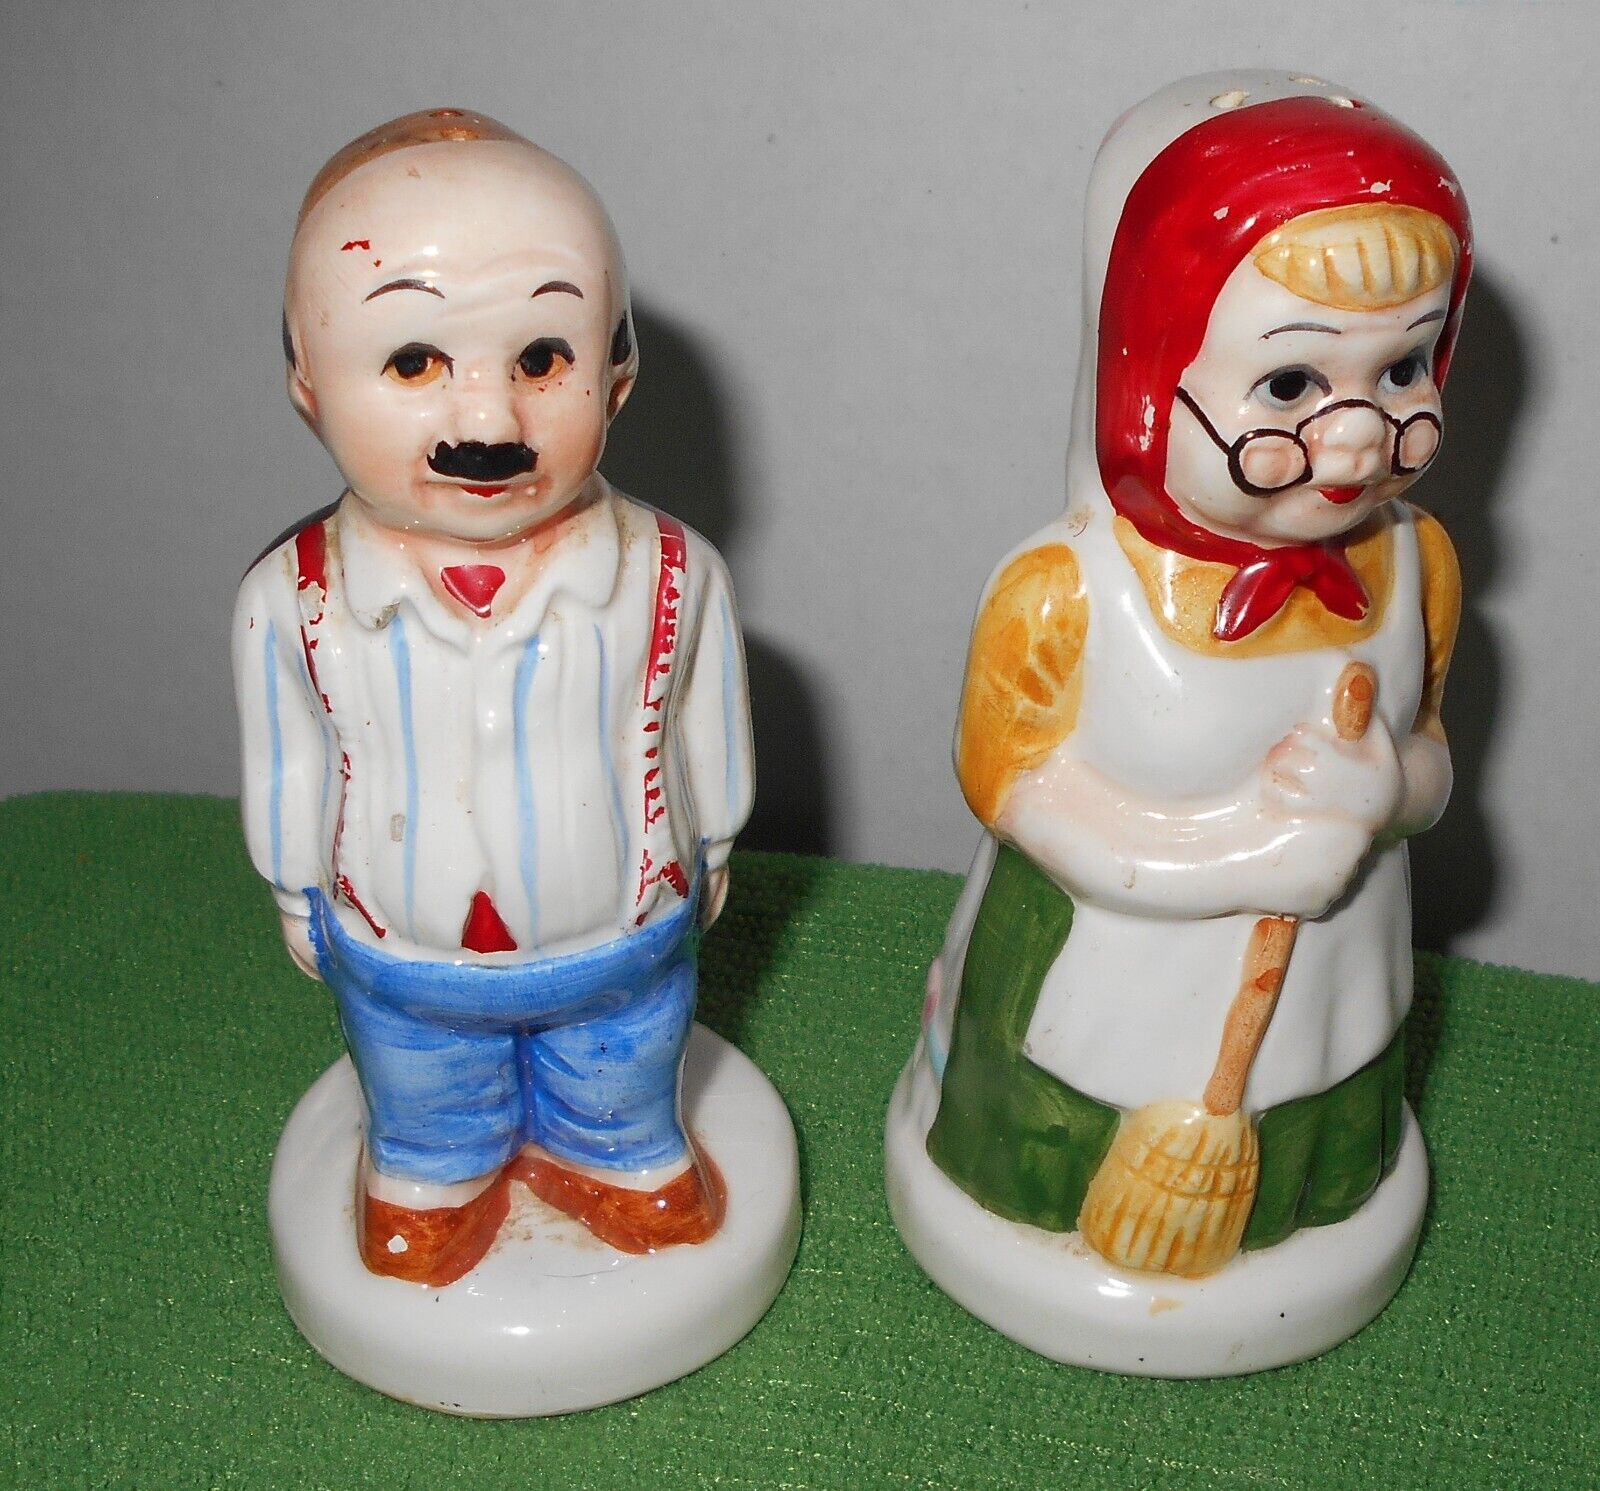 Two-Faced SALT & PEPPER SHAKERS ~ Vintage ~Estate Find ~ Unusual and Cute